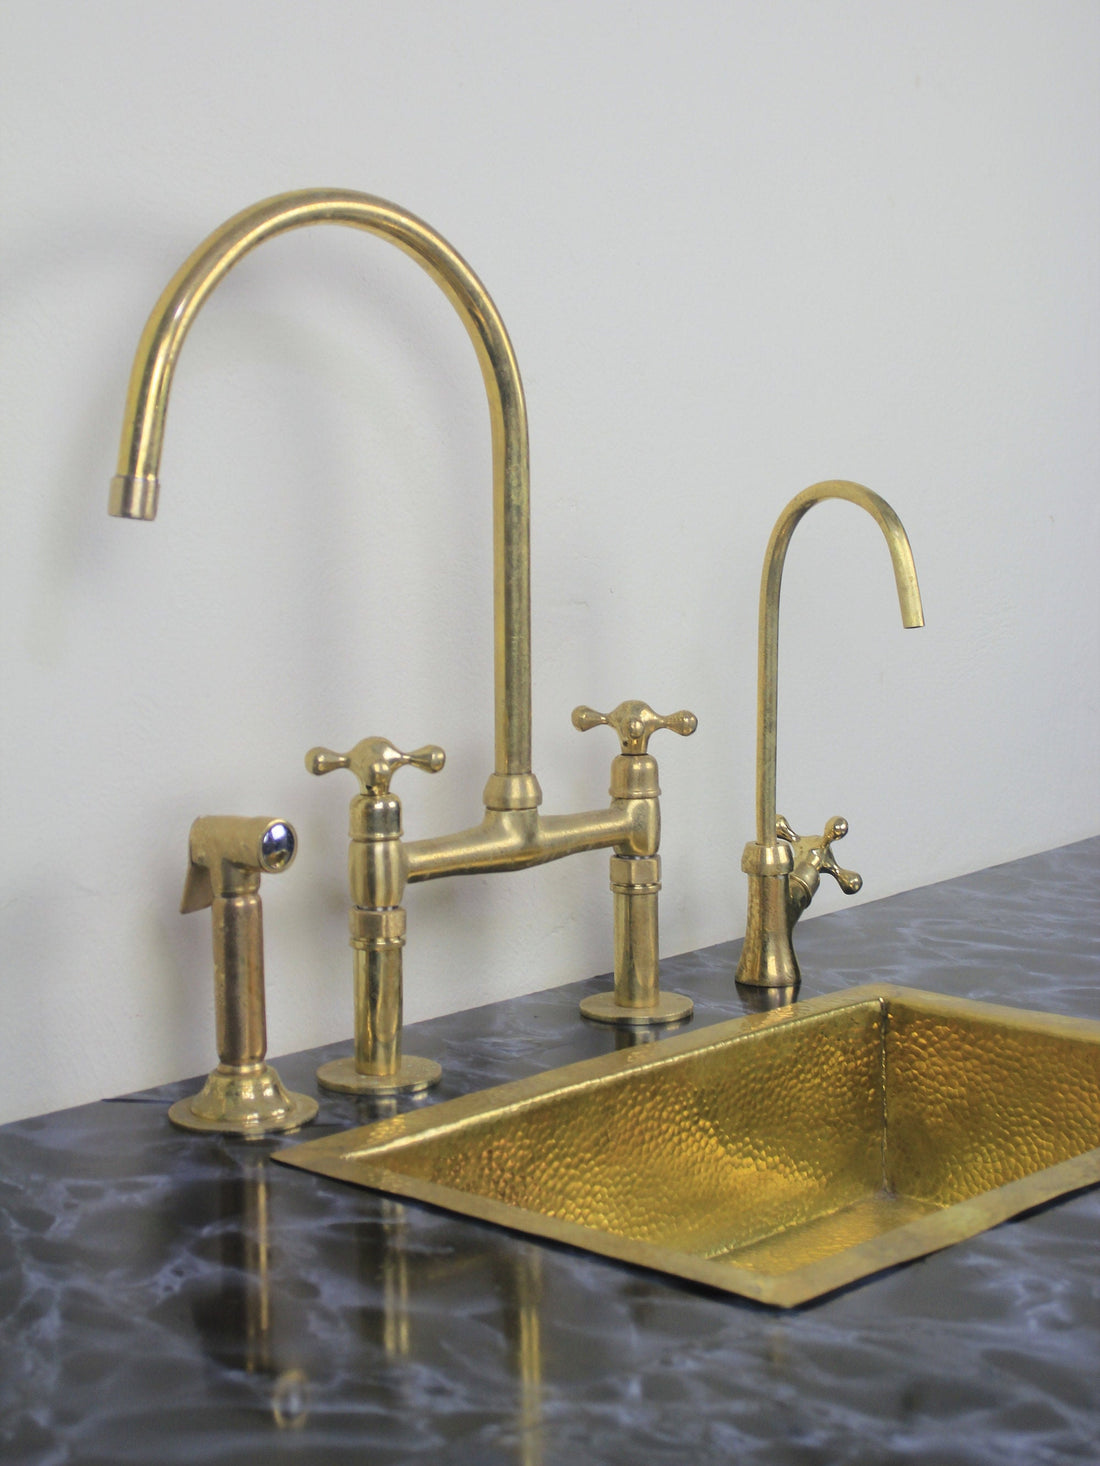 Aged Unlacquered Brass Bridge Faucet, Cold Water Faucet and Sprayer